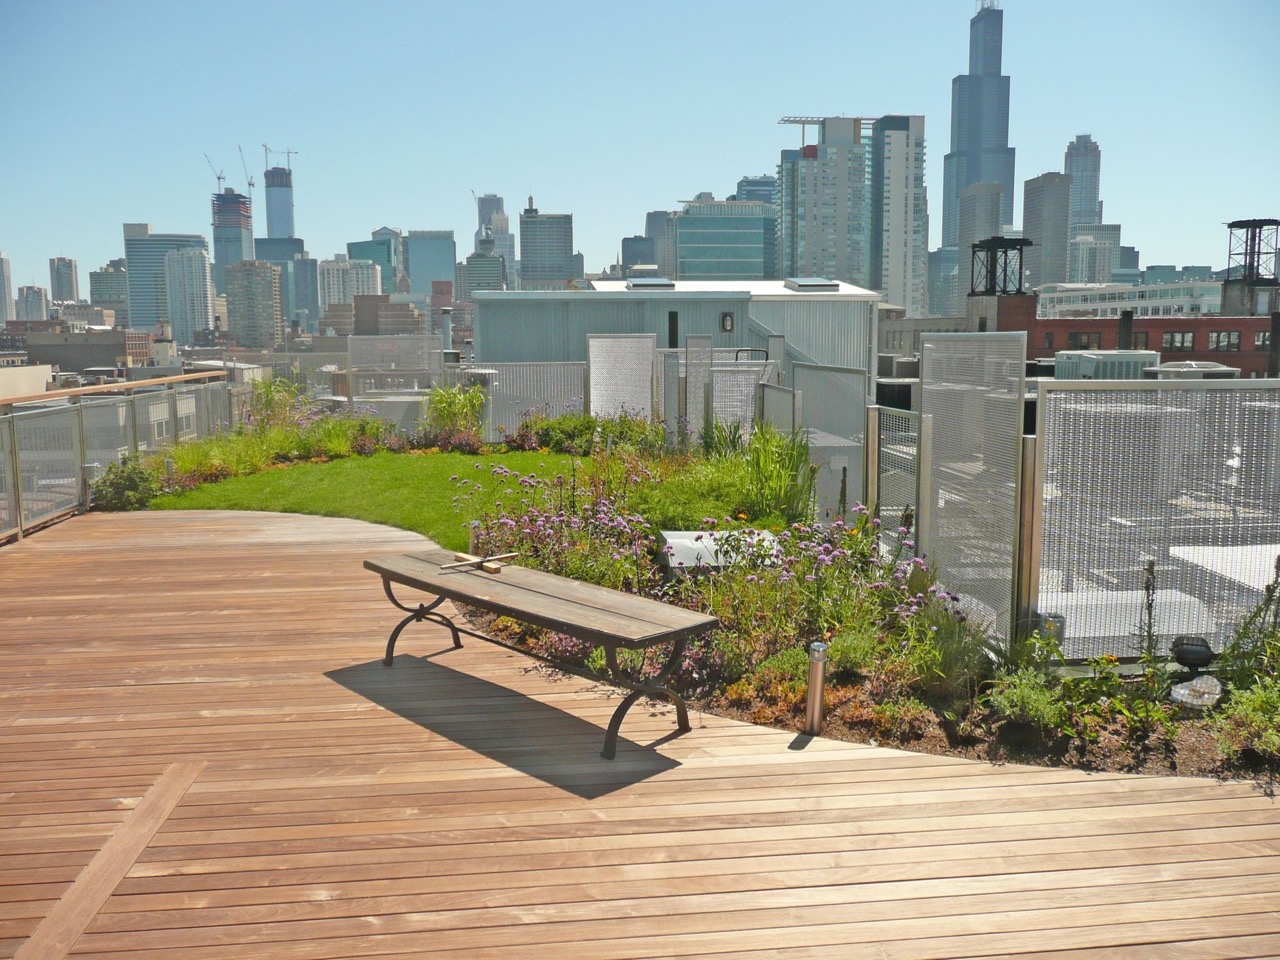 Designer Mesh Infill Panels used in a garden on top of a high-rise building near downtown Chicago.